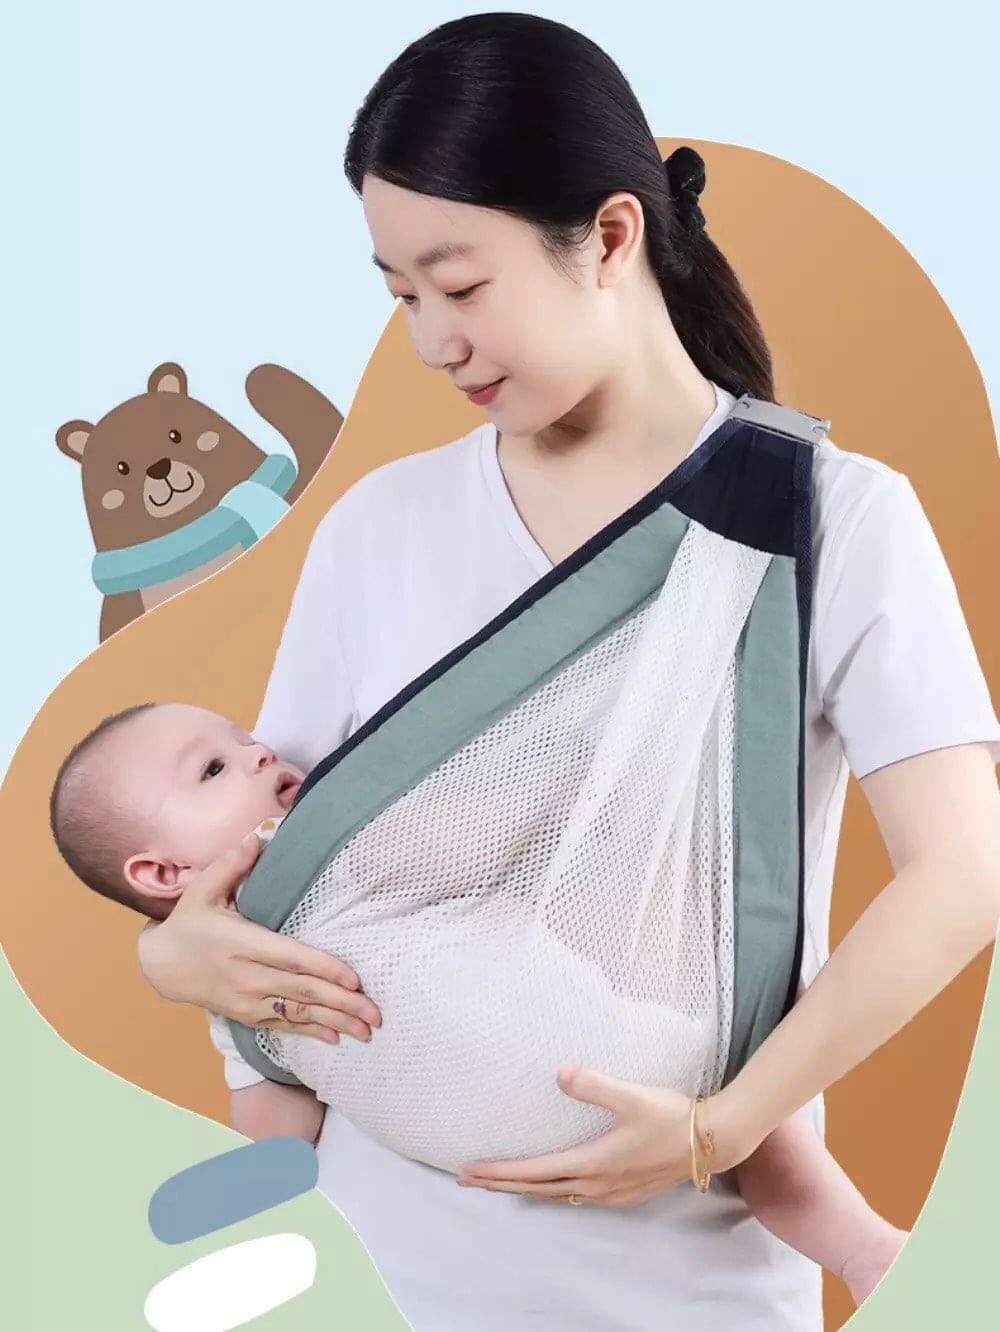 Baby Cling Wrap, Multifunctional Baby Carrier Ring Sling, Carrier Comfortable Infant Kangaroo, Baby Toddler Carrier, p Seat For Newborn Multi-function Infant Sling Carrier